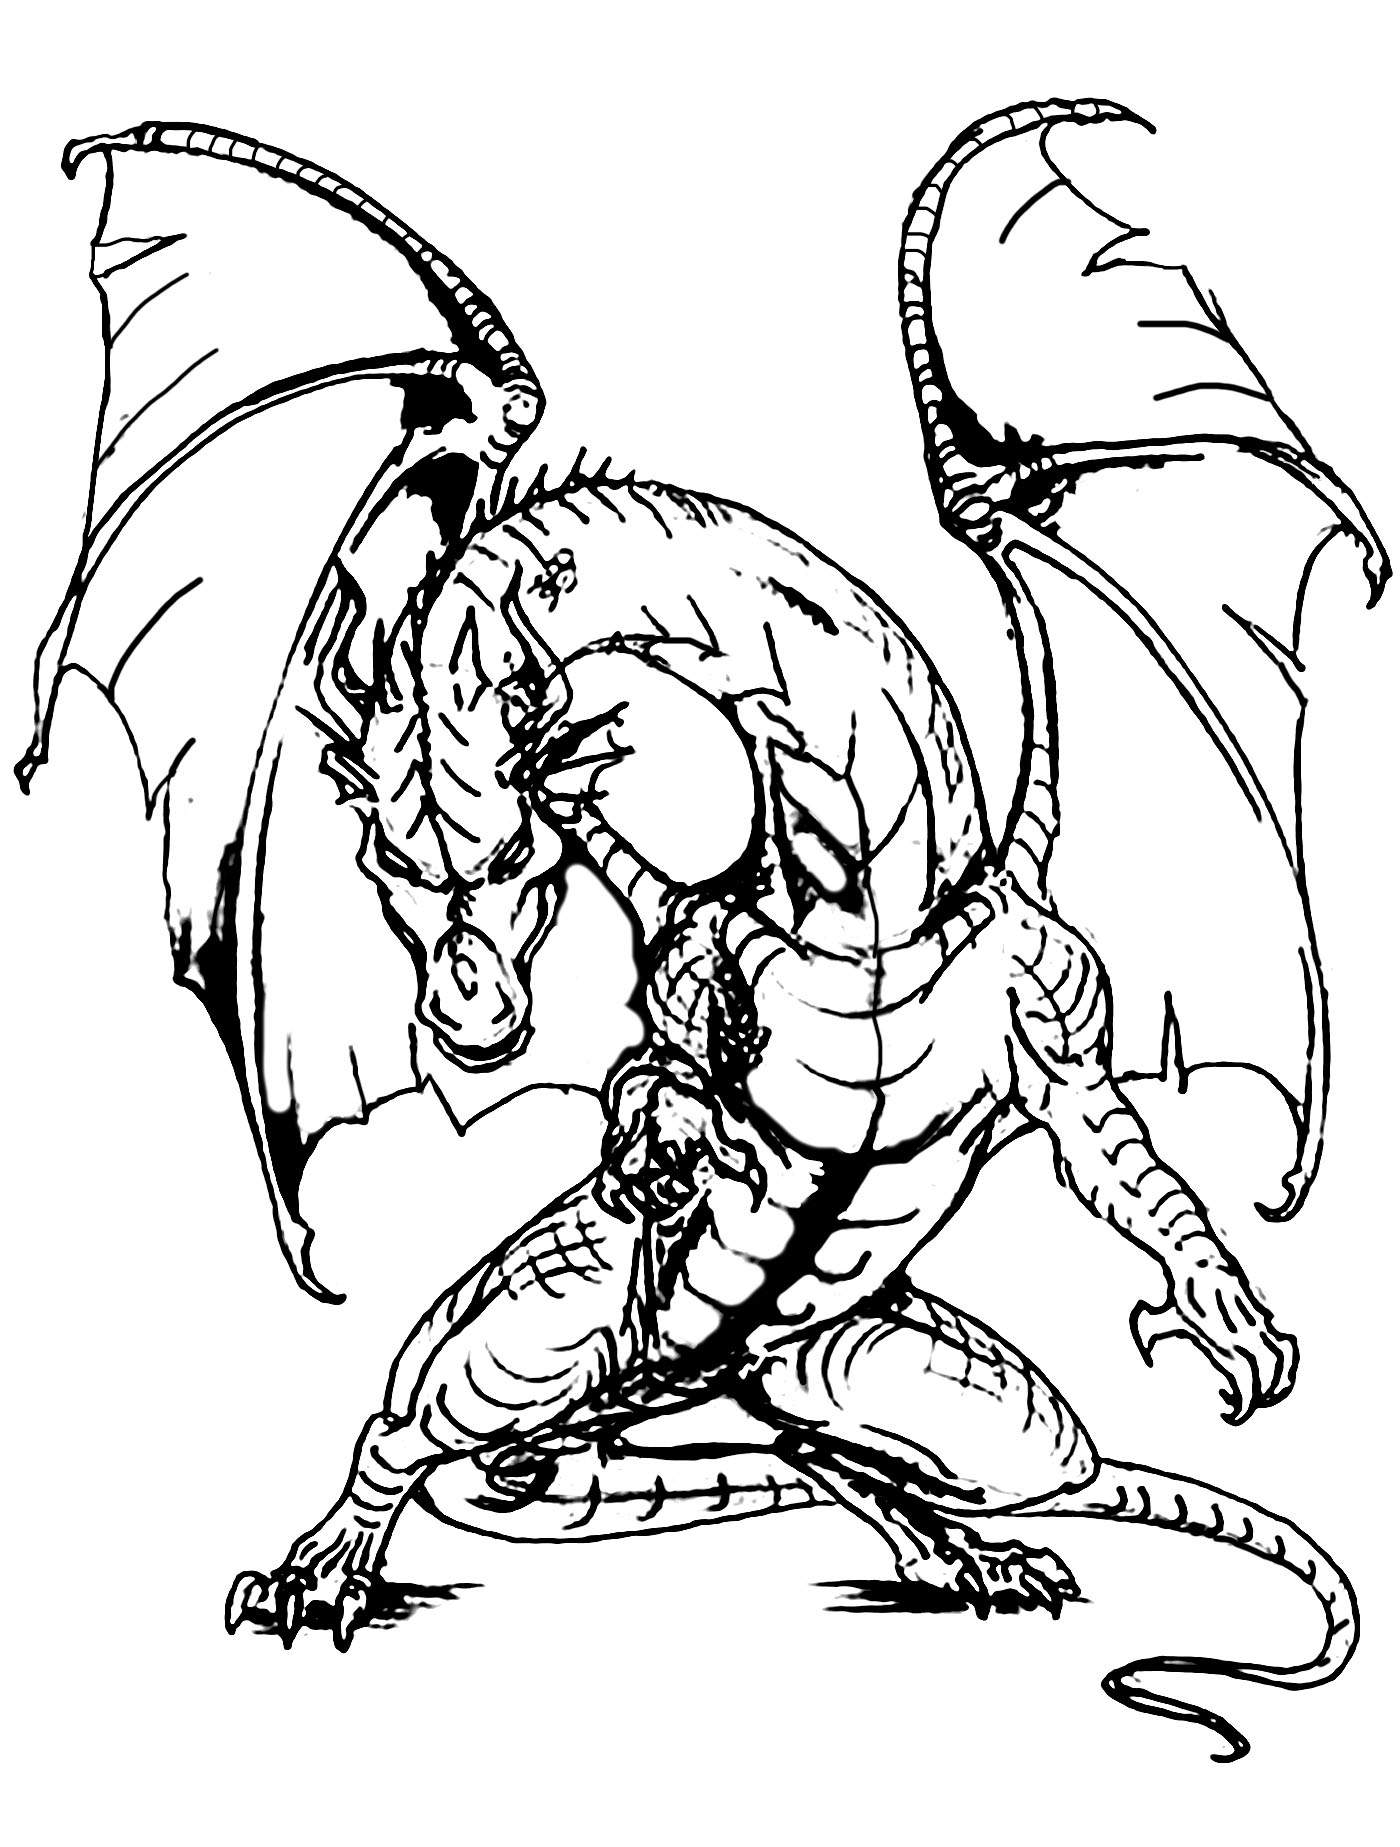 39-animal-coloring-pages-for-adults-dragon-images-colorist